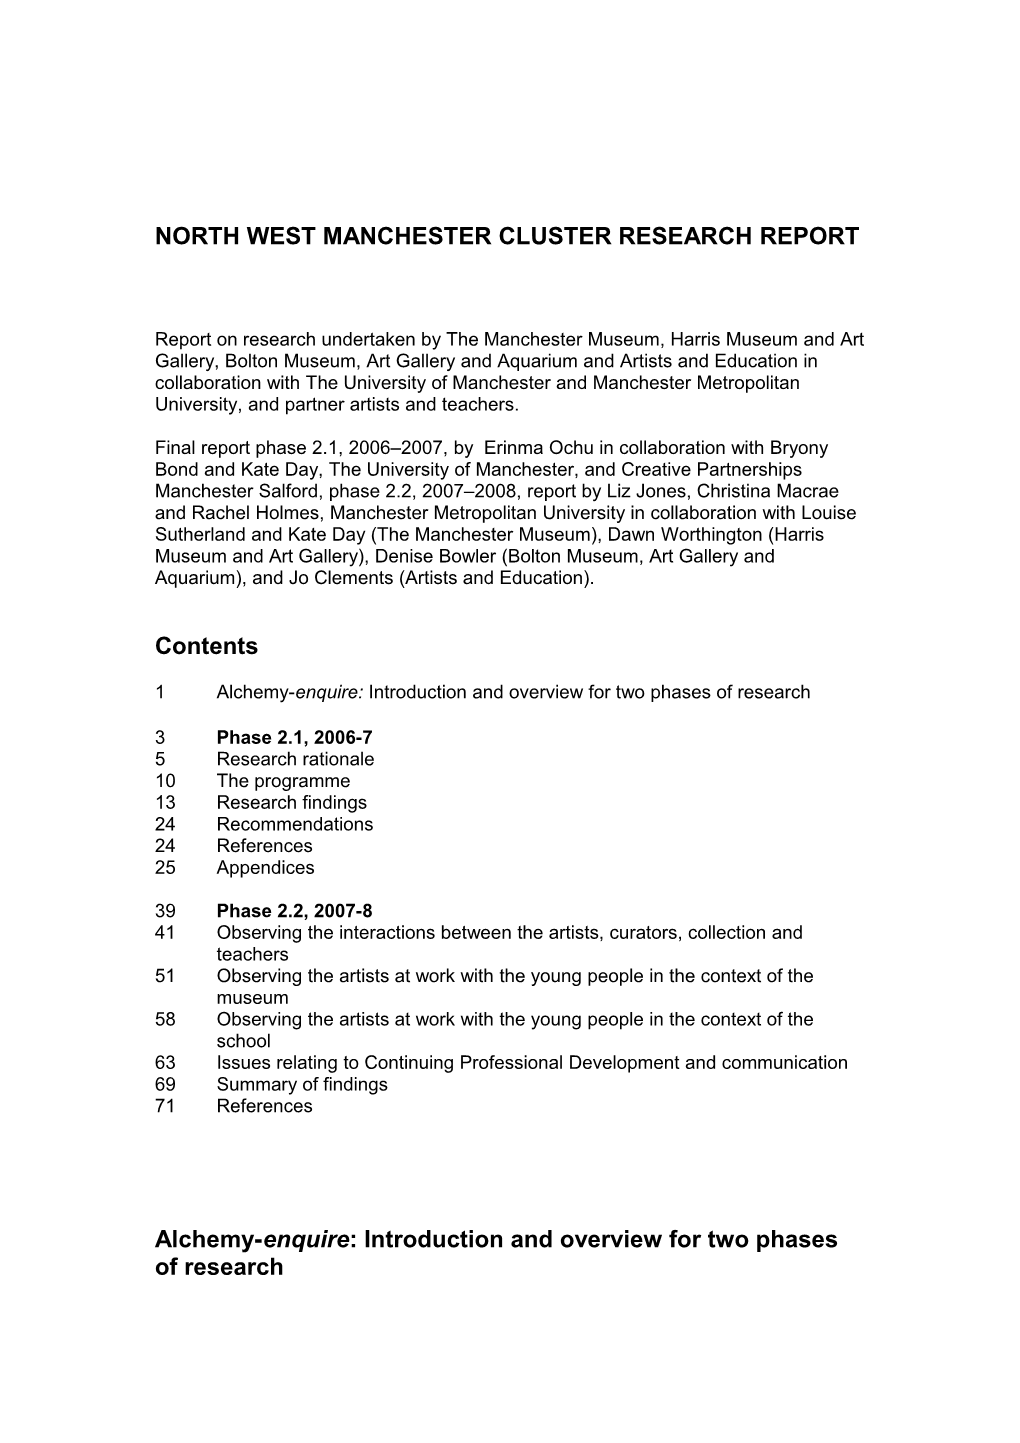 North West Manchester Cluster Research Report